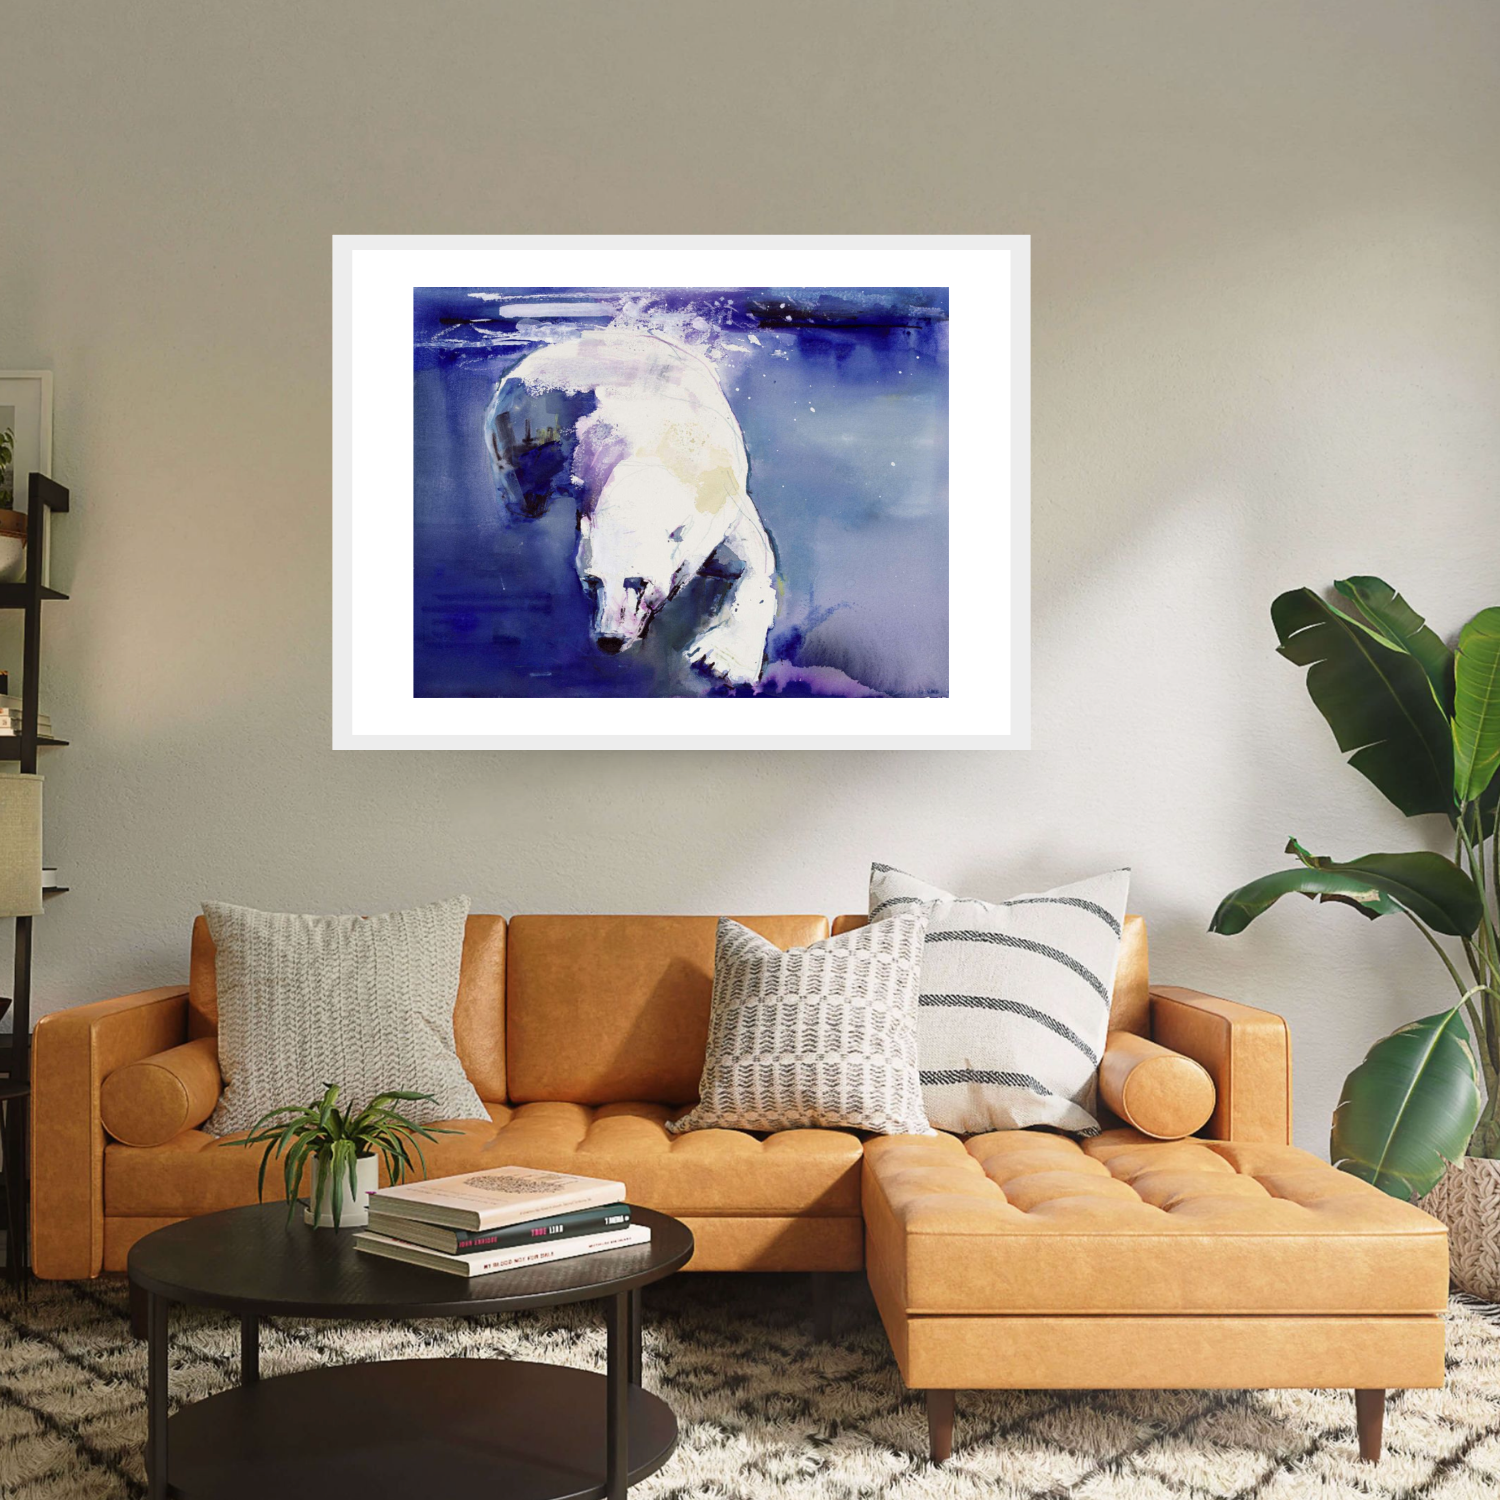 White framed 'Underwater Bear' by Mark Adlington. This artwork portrays a polar bear gracefully swimming beneath icy blue waters. Available as archival digital print, it's a stunning addition to any collection, capturing the beauty of wildlife in exquisite detail.